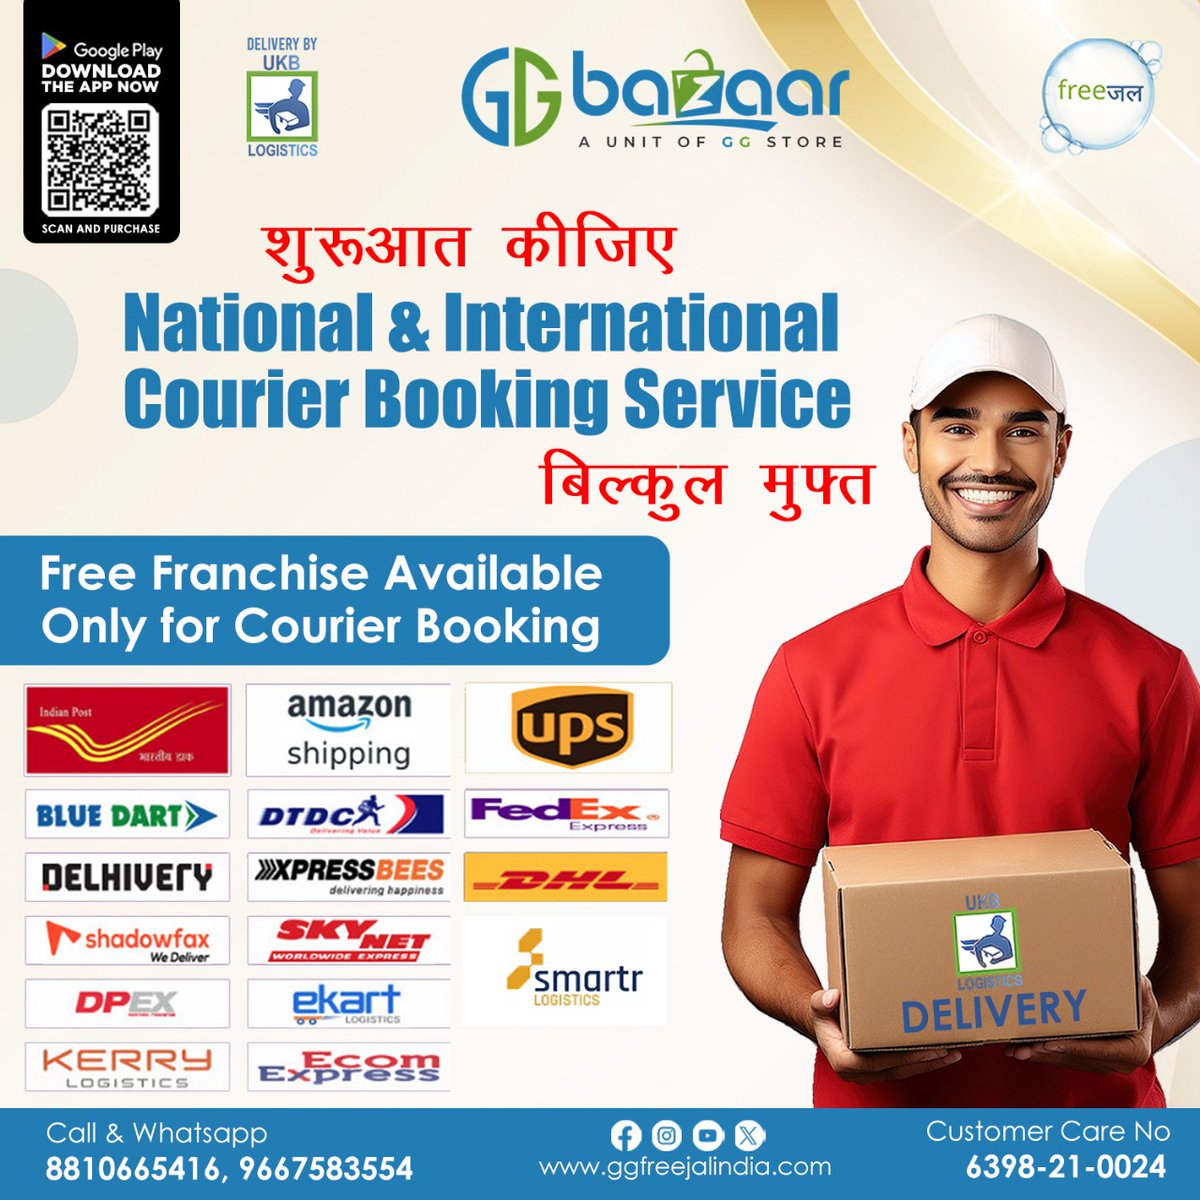 '🌍✈️ Ready to go global? Start your journey with our National & International Courier Booking Service!  Enjoy FREE franchise opportunities exclusively for courier bookings. Get started today! 
.
For more info, call us at 
+91 8810665416 or +91 9667583554,